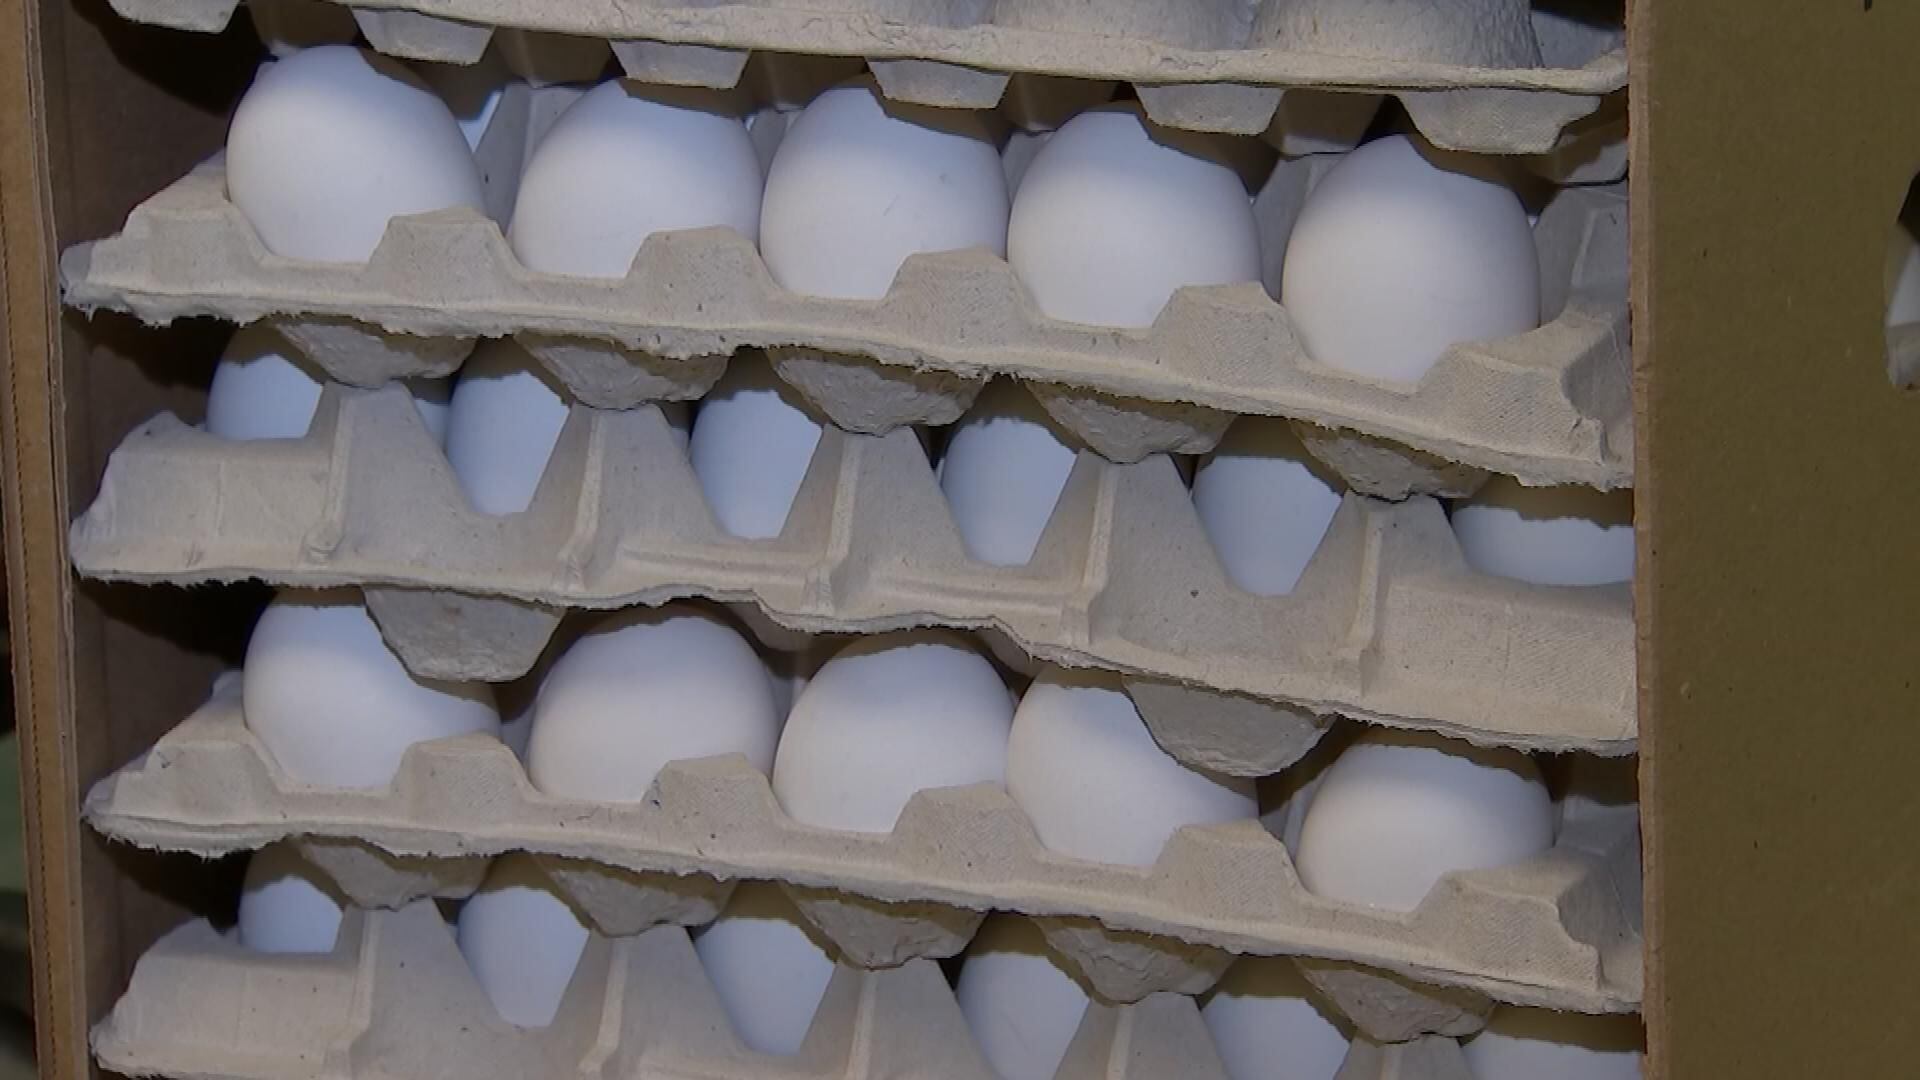 Grade A Large Eggs, 12 Count